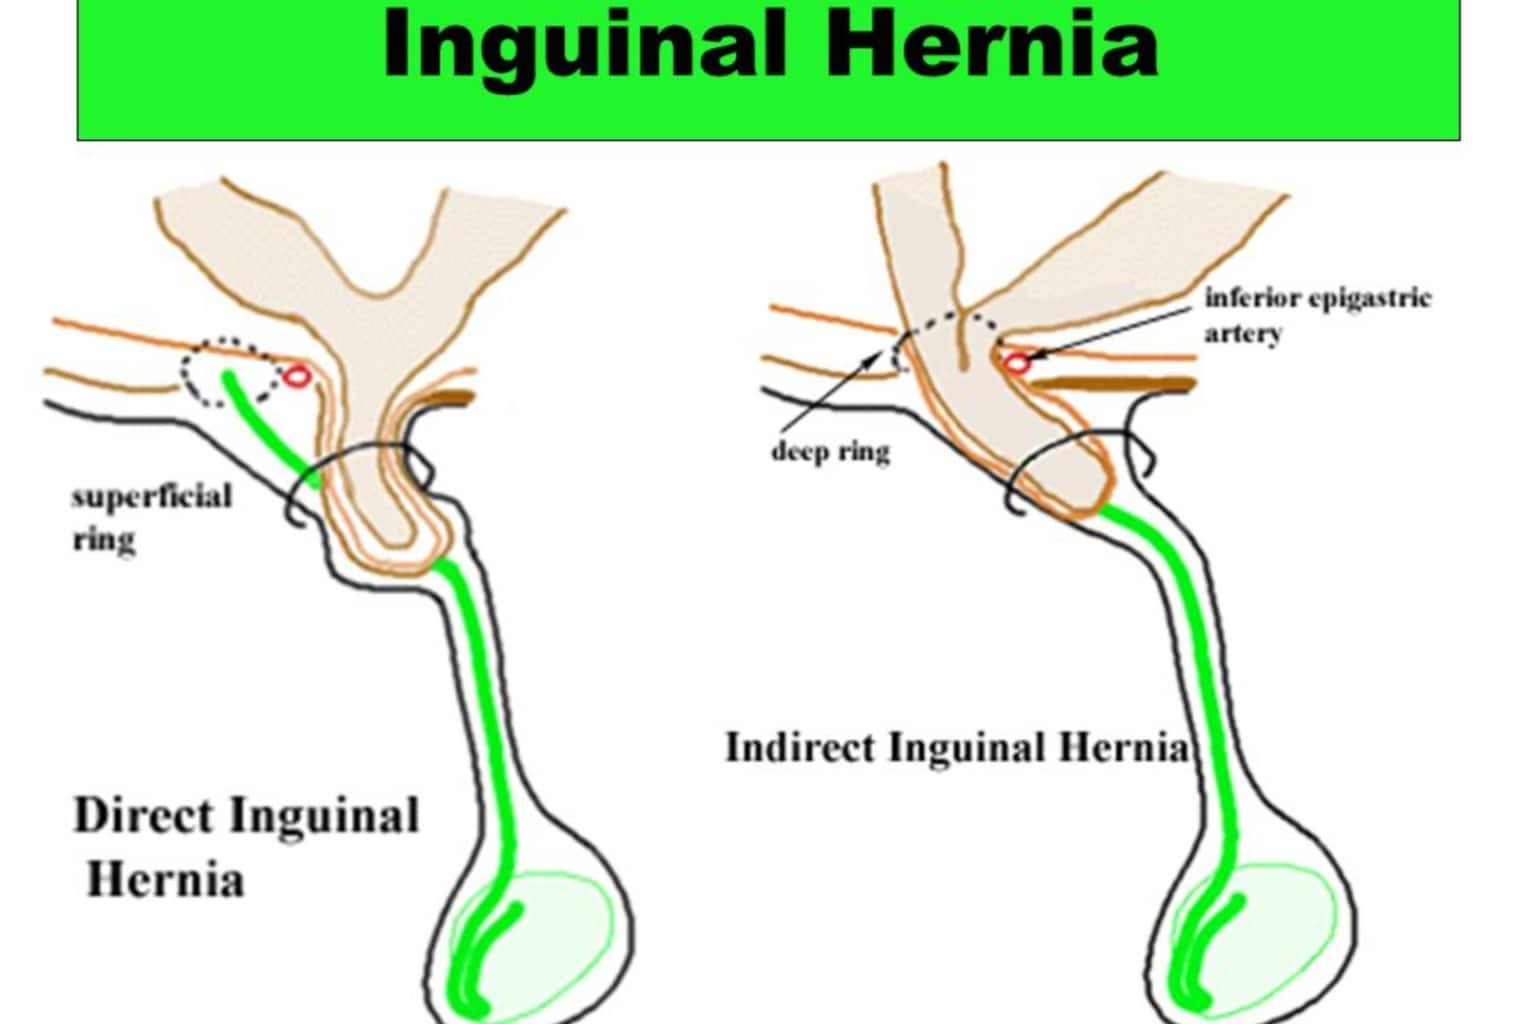 Inguinal Hernia Surgery in Indore, Inguinal Hernia Treatment Doctors in Indore